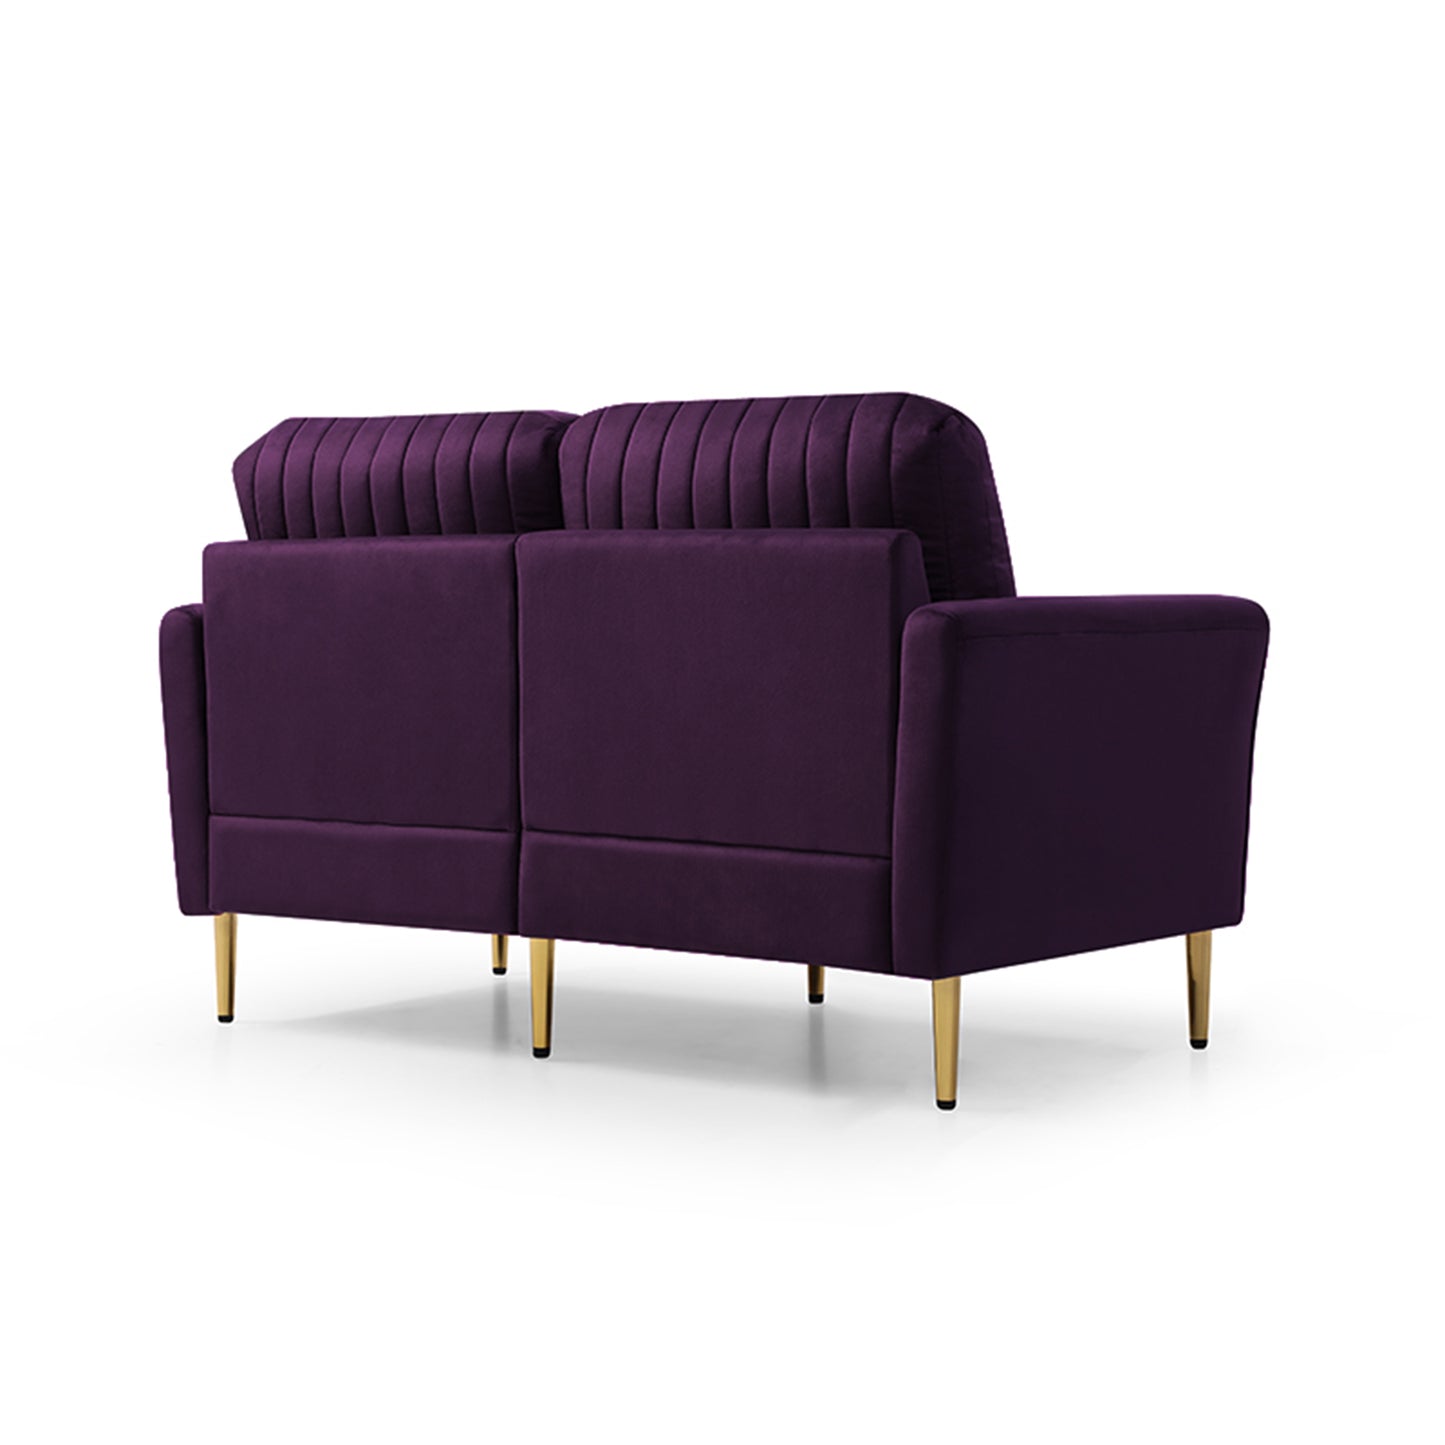 Purple Velvet Upholstered Round Arm Loveseat 2 Seat Sofa with 2 Throw Pillows